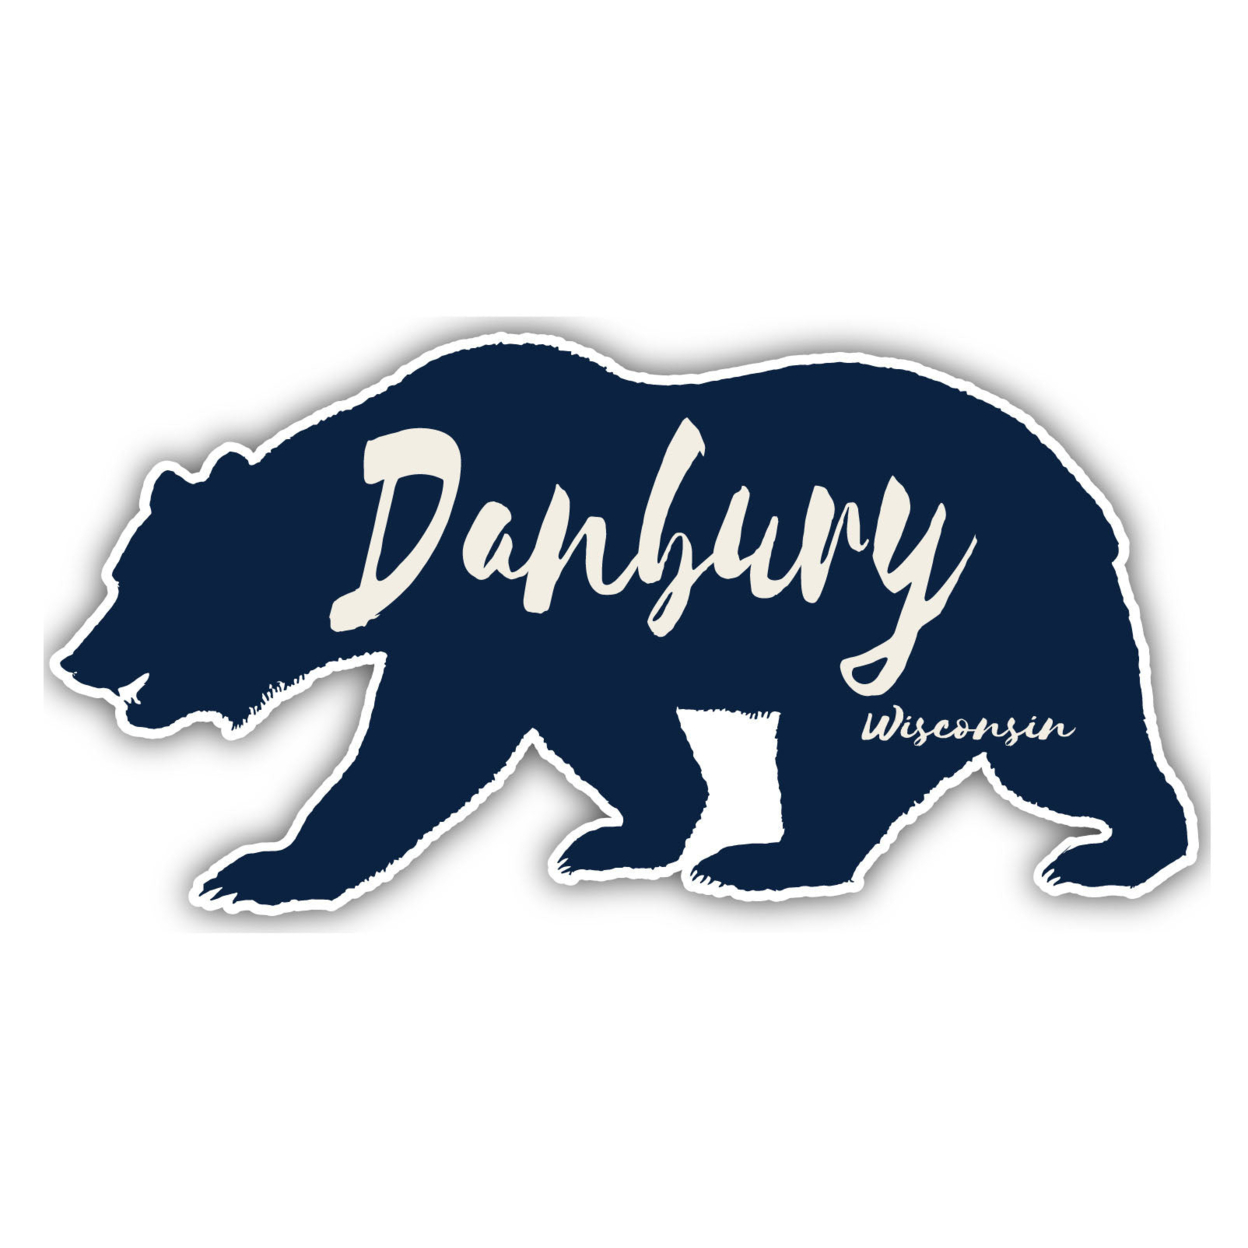 Danbury Wisconsin Souvenir Decorative Stickers (Choose Theme And Size) - 4-Pack, 6-Inch, Great Outdoors